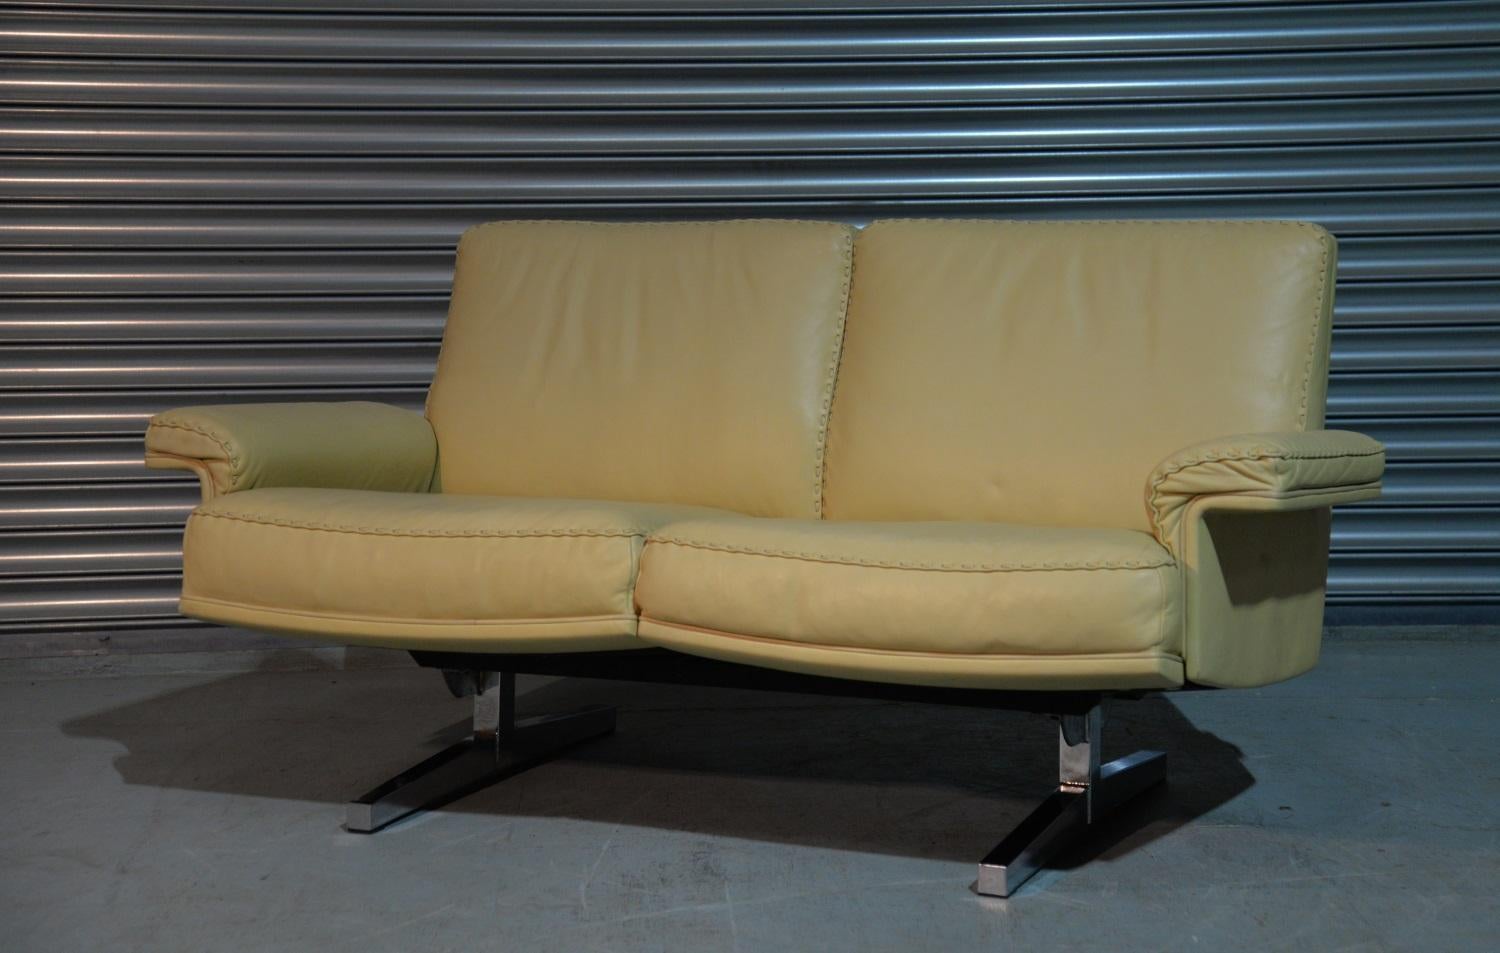 Discounted airfreight for our US Continent and International customers ( from 2 weeks door to door)

We are delighted to bring to you a rarely available and highly desirable retro De Sede DS 35 two-seat sofa or loveseat in beautiful soft cream